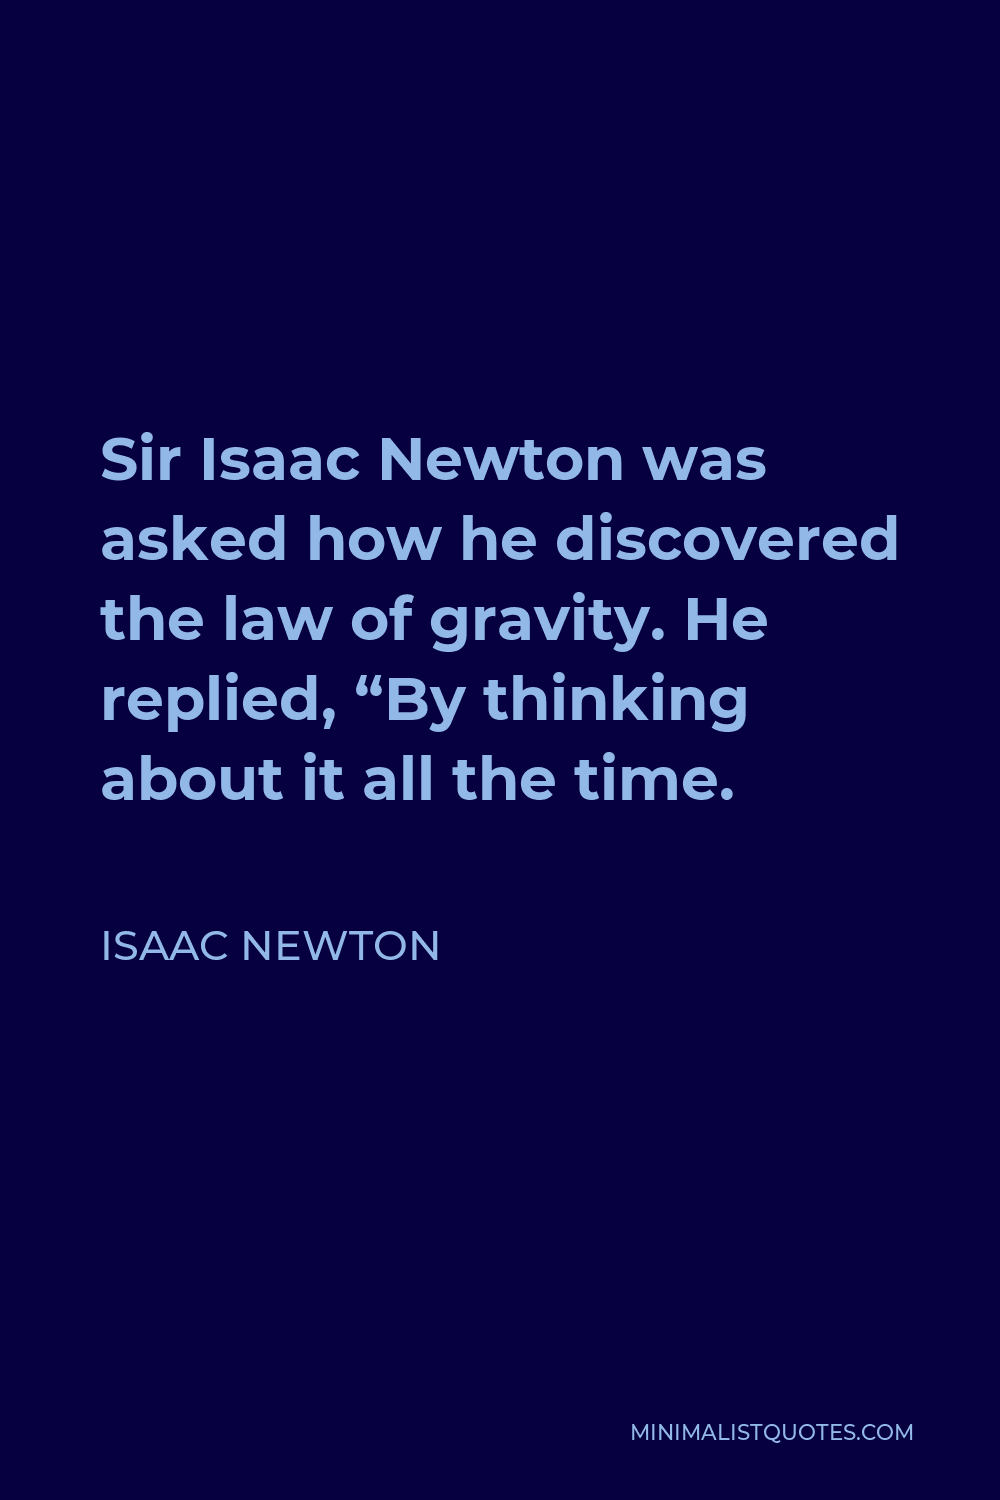 Isaac Newton Quote Sir Isaac Newton Was Asked How He Discovered The Law Of Gravity He Replied 6431